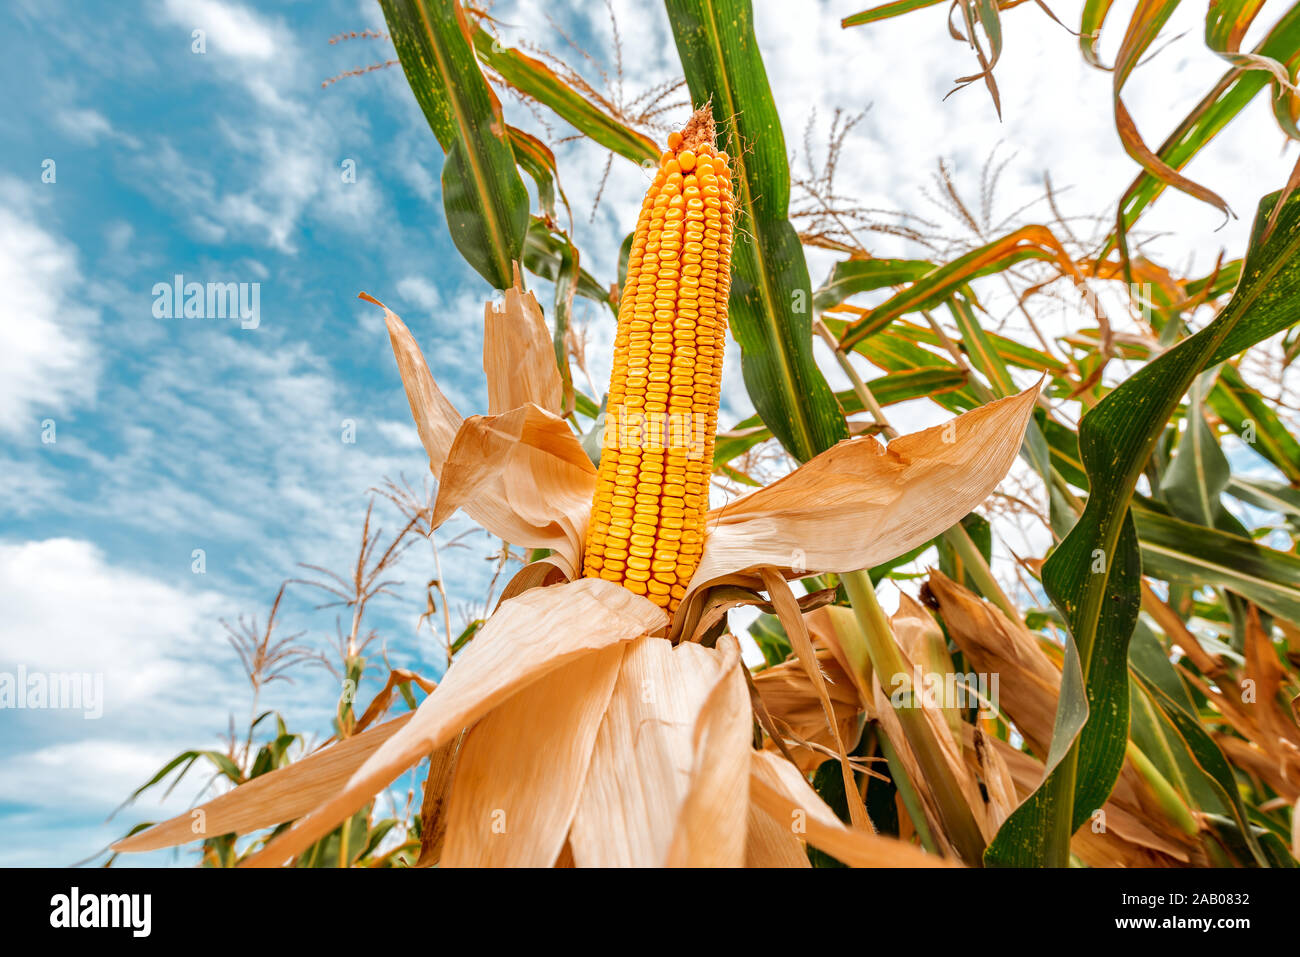 Corn on the cob in field, cultivated maize crops ripe and ready for harvest Stock Photo